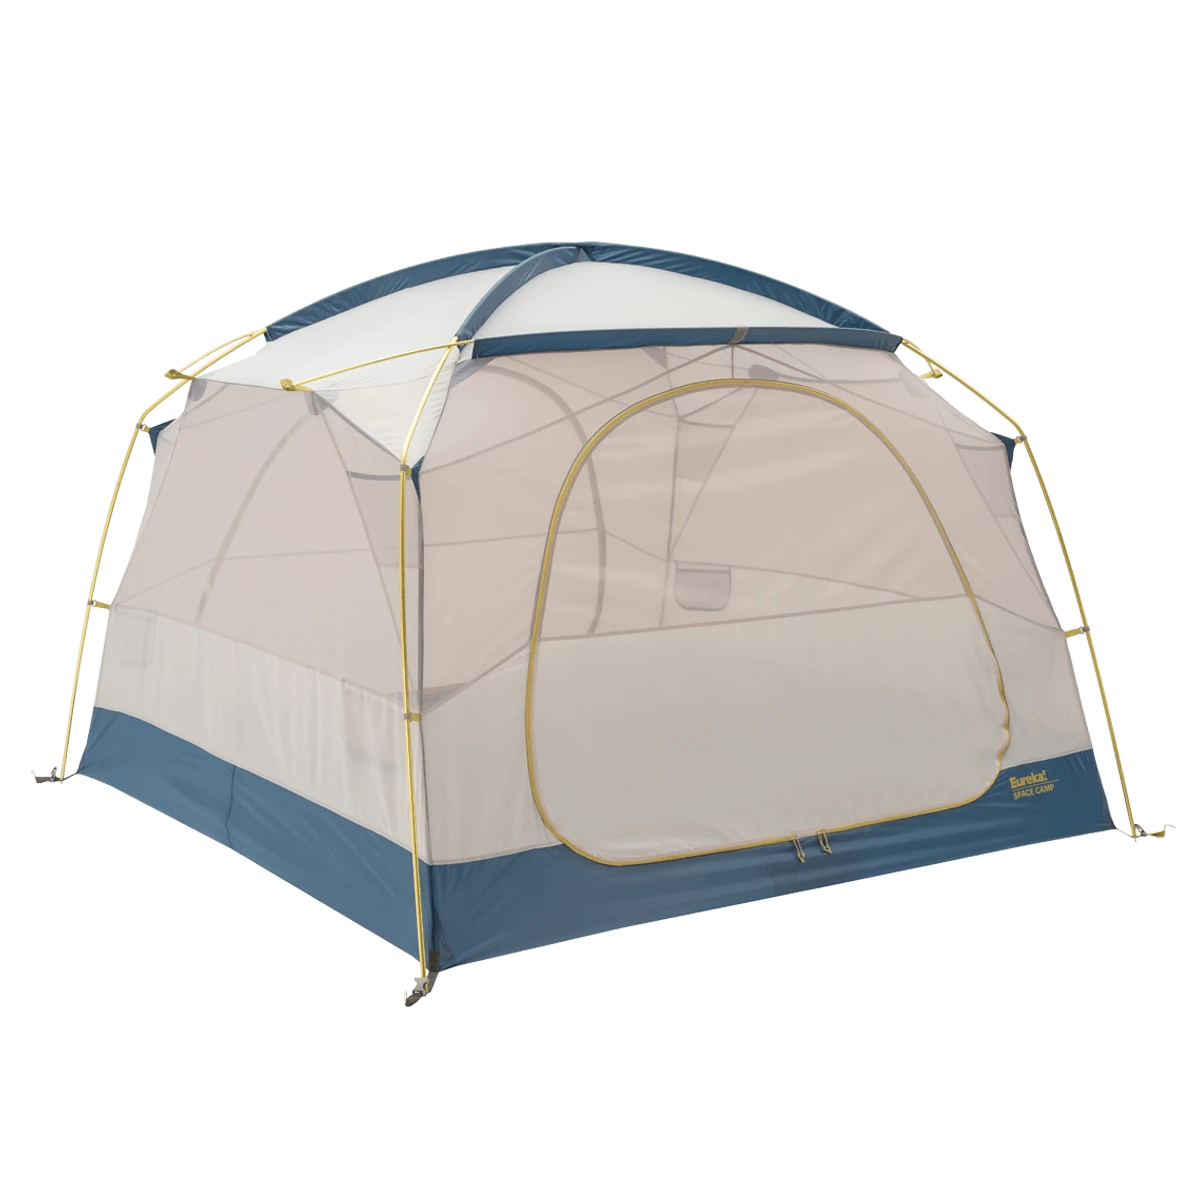 Space Camp 6 Tent without rainfly